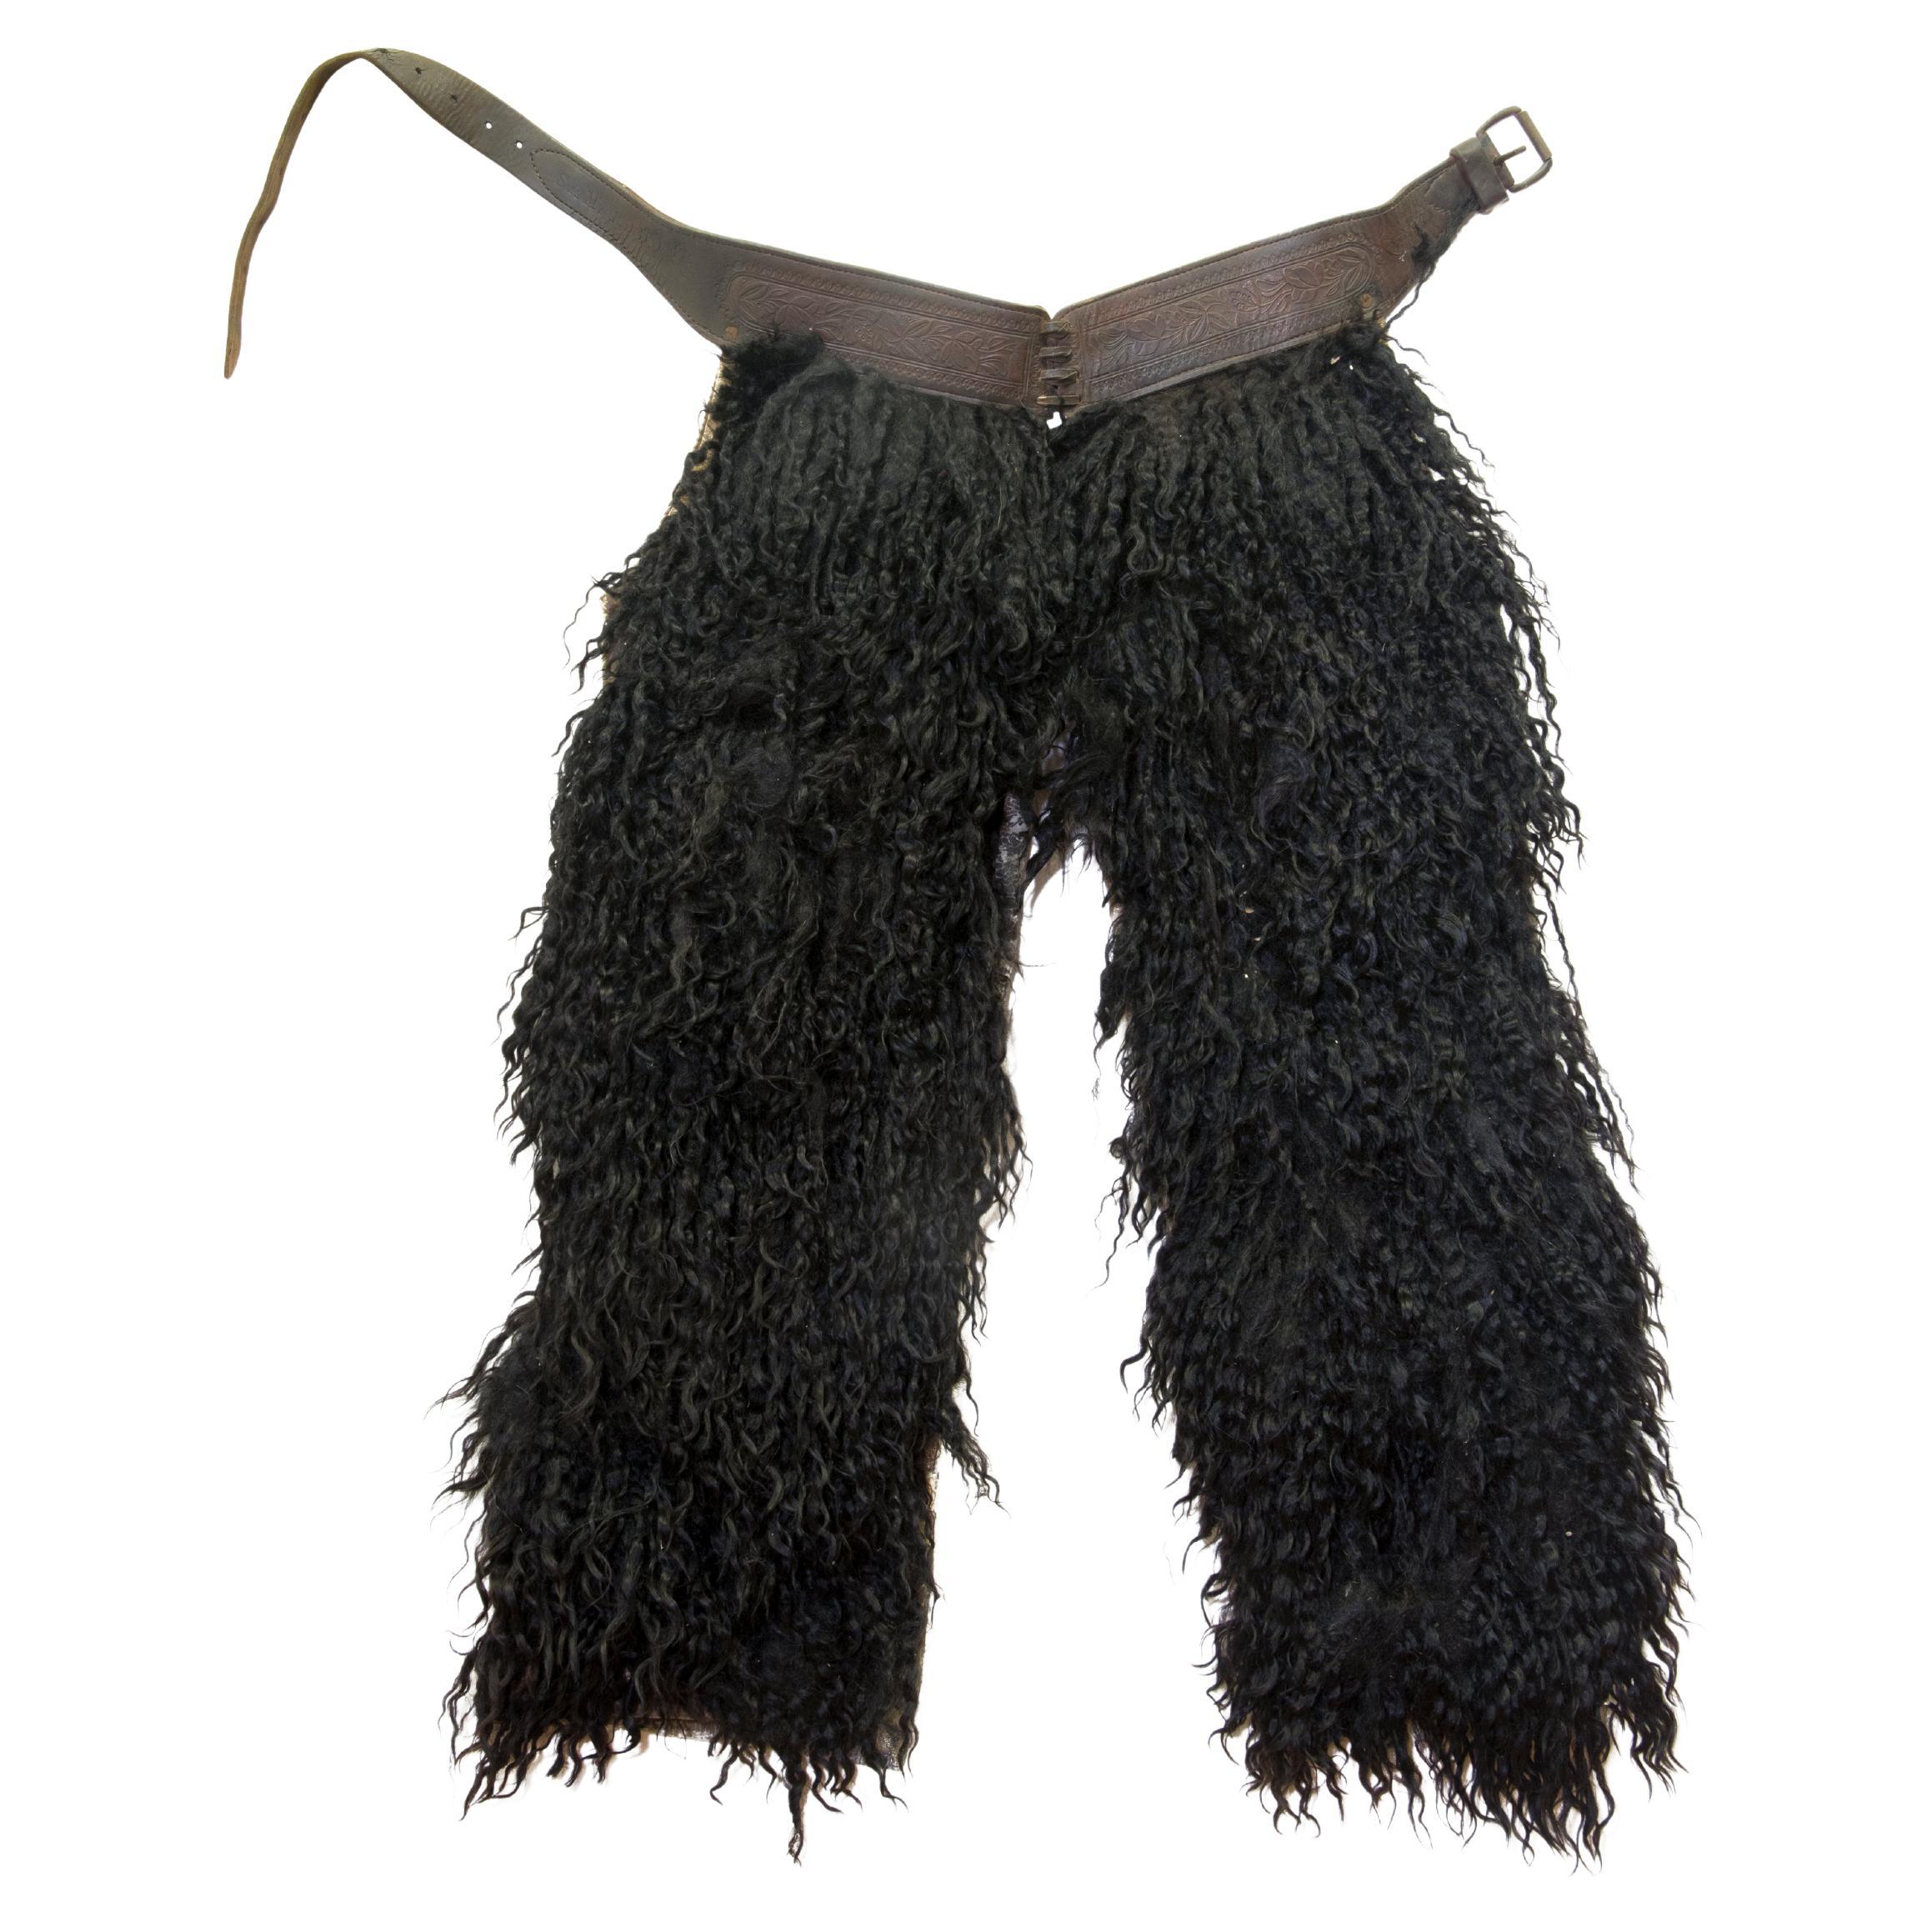 Black Wooly Chaps by Henry L. Kuck For Sale